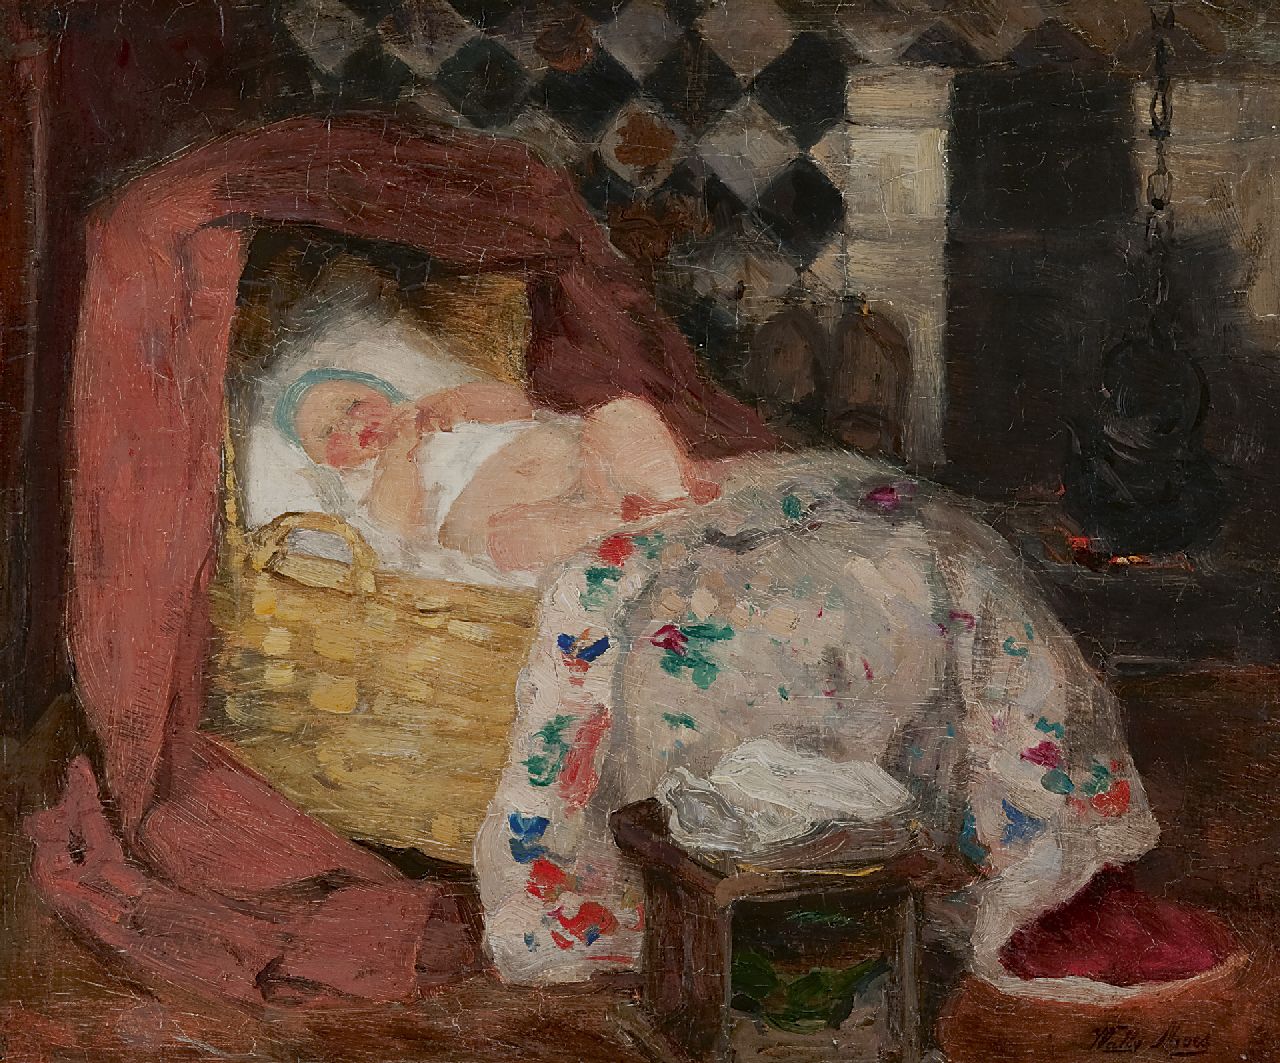 Moes W.W.  | Wilhelmina Walburga 'Wally' Moes | Paintings offered for sale | Interior with baby in a crib, oil on canvas 34.7 x 41.3 cm, signed l.r.